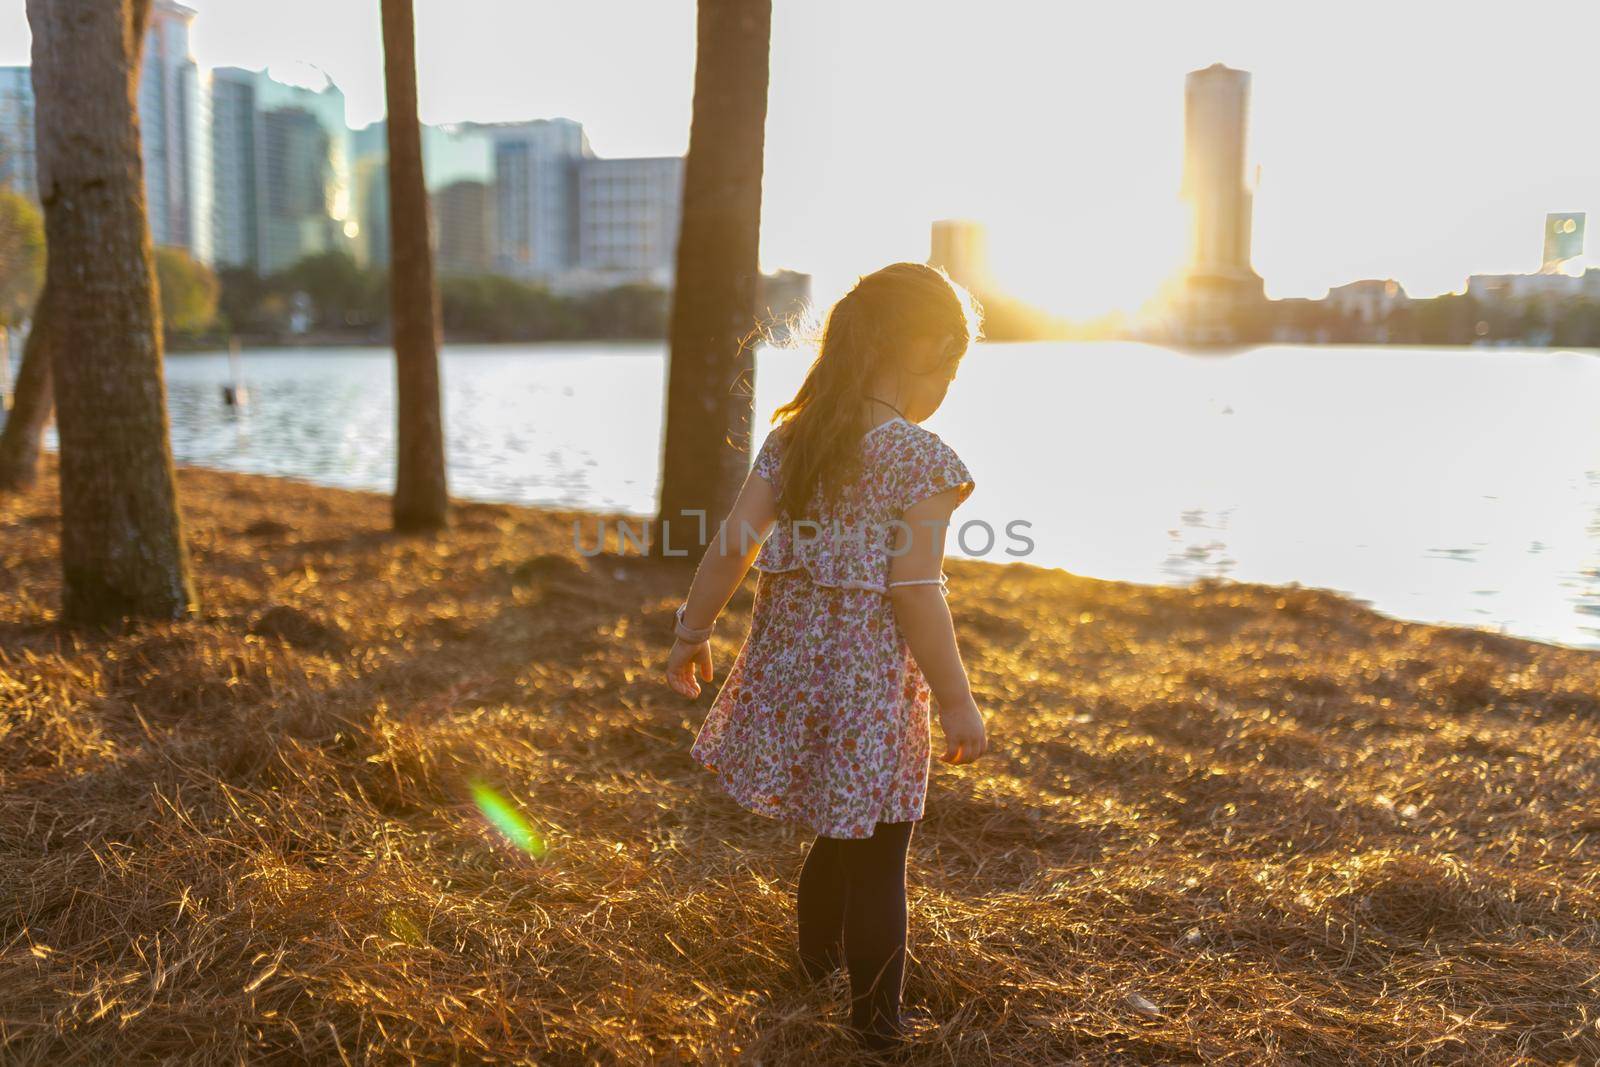 Warm view of cute little girl in colorful dress standing on grass with blurry lake and bright sunset as background. Sun shining on horizon behind young child in the evening. Kids playing outside